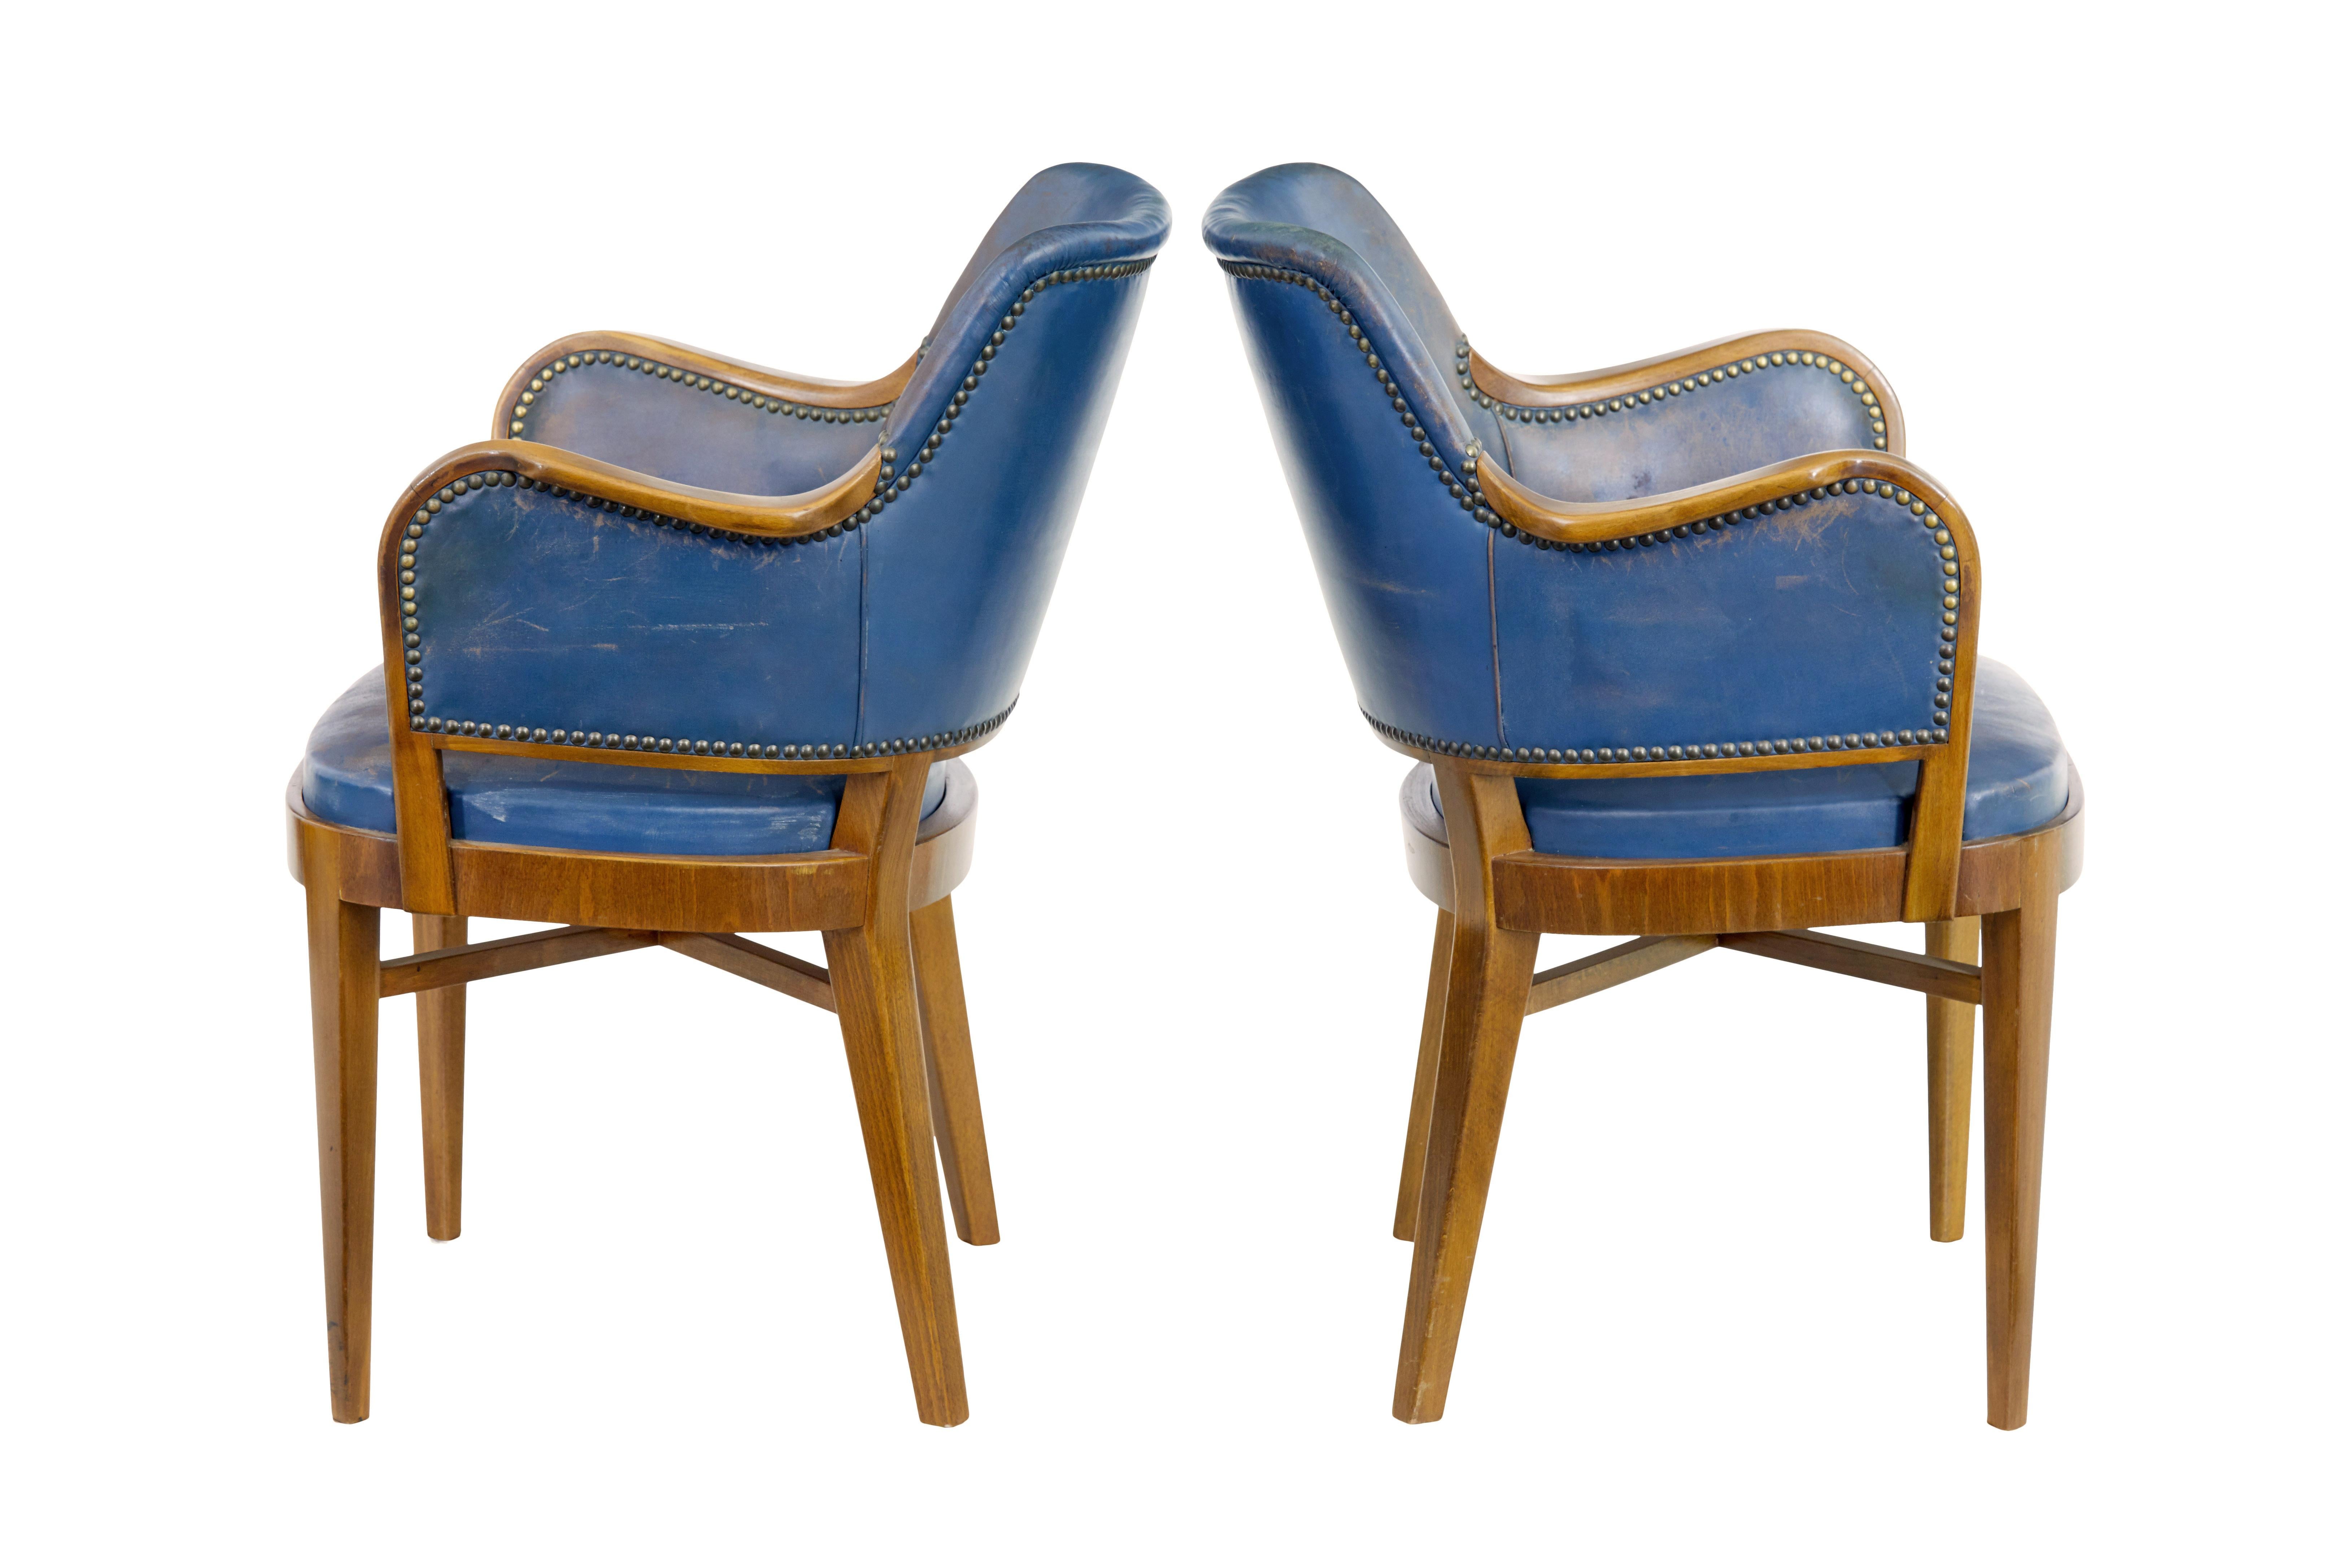 Pair of mid 20th century teak and leather armchairs circa 1950.

Very comfortable pair of Scandinavian armchairs. Shaped backs and made from teak that has been coloured to match walnut.  Show frame arms and original leather covering and studwork